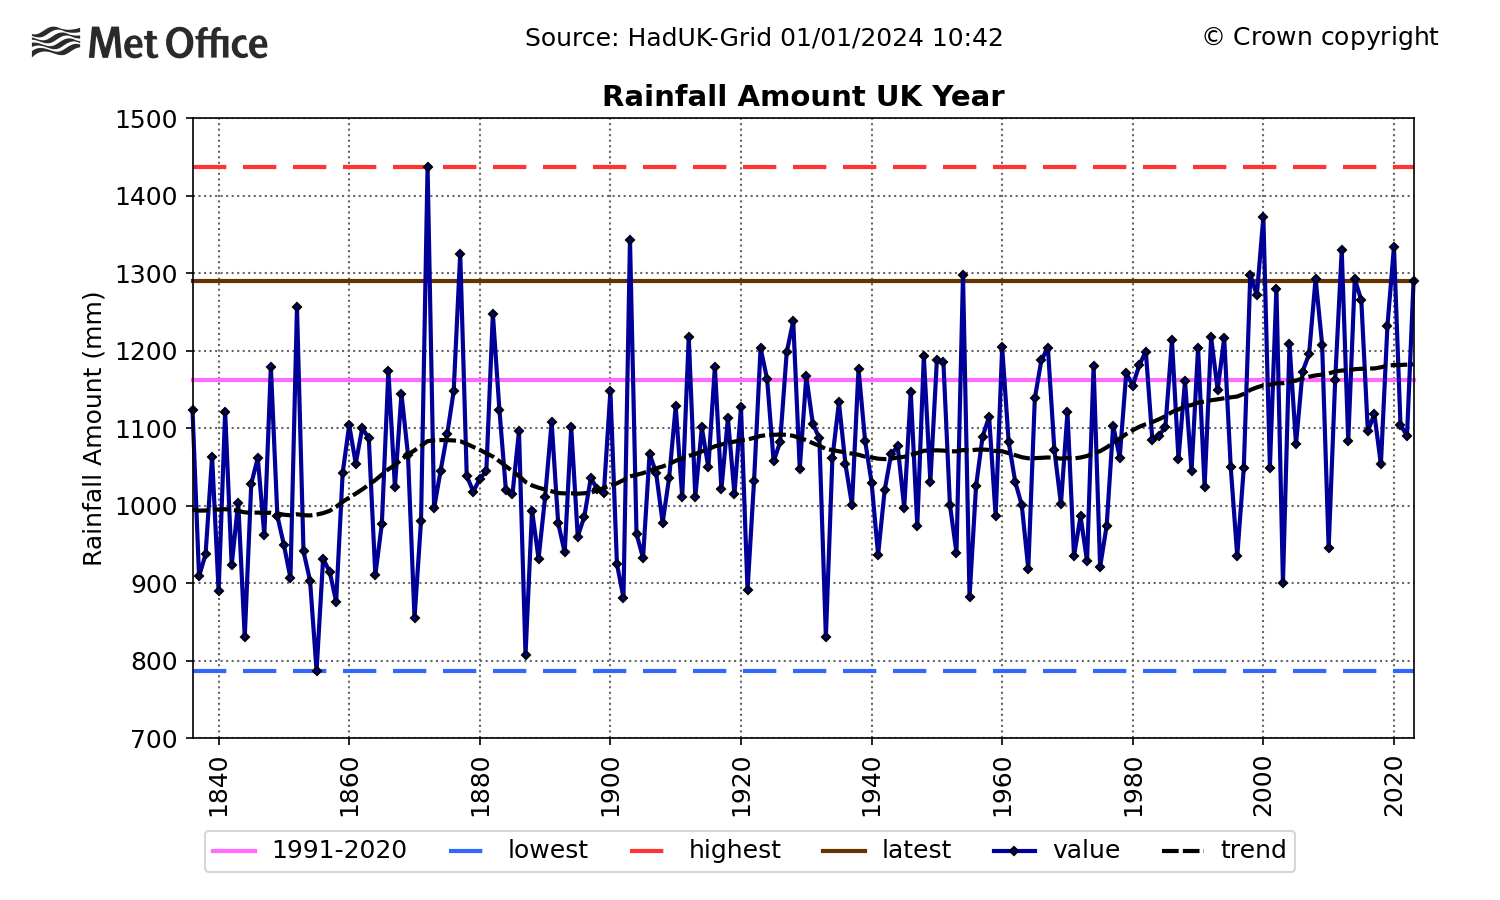 UK annual rainfall amounts over the years. There's year-to-year variability but the trend is generally increasing.